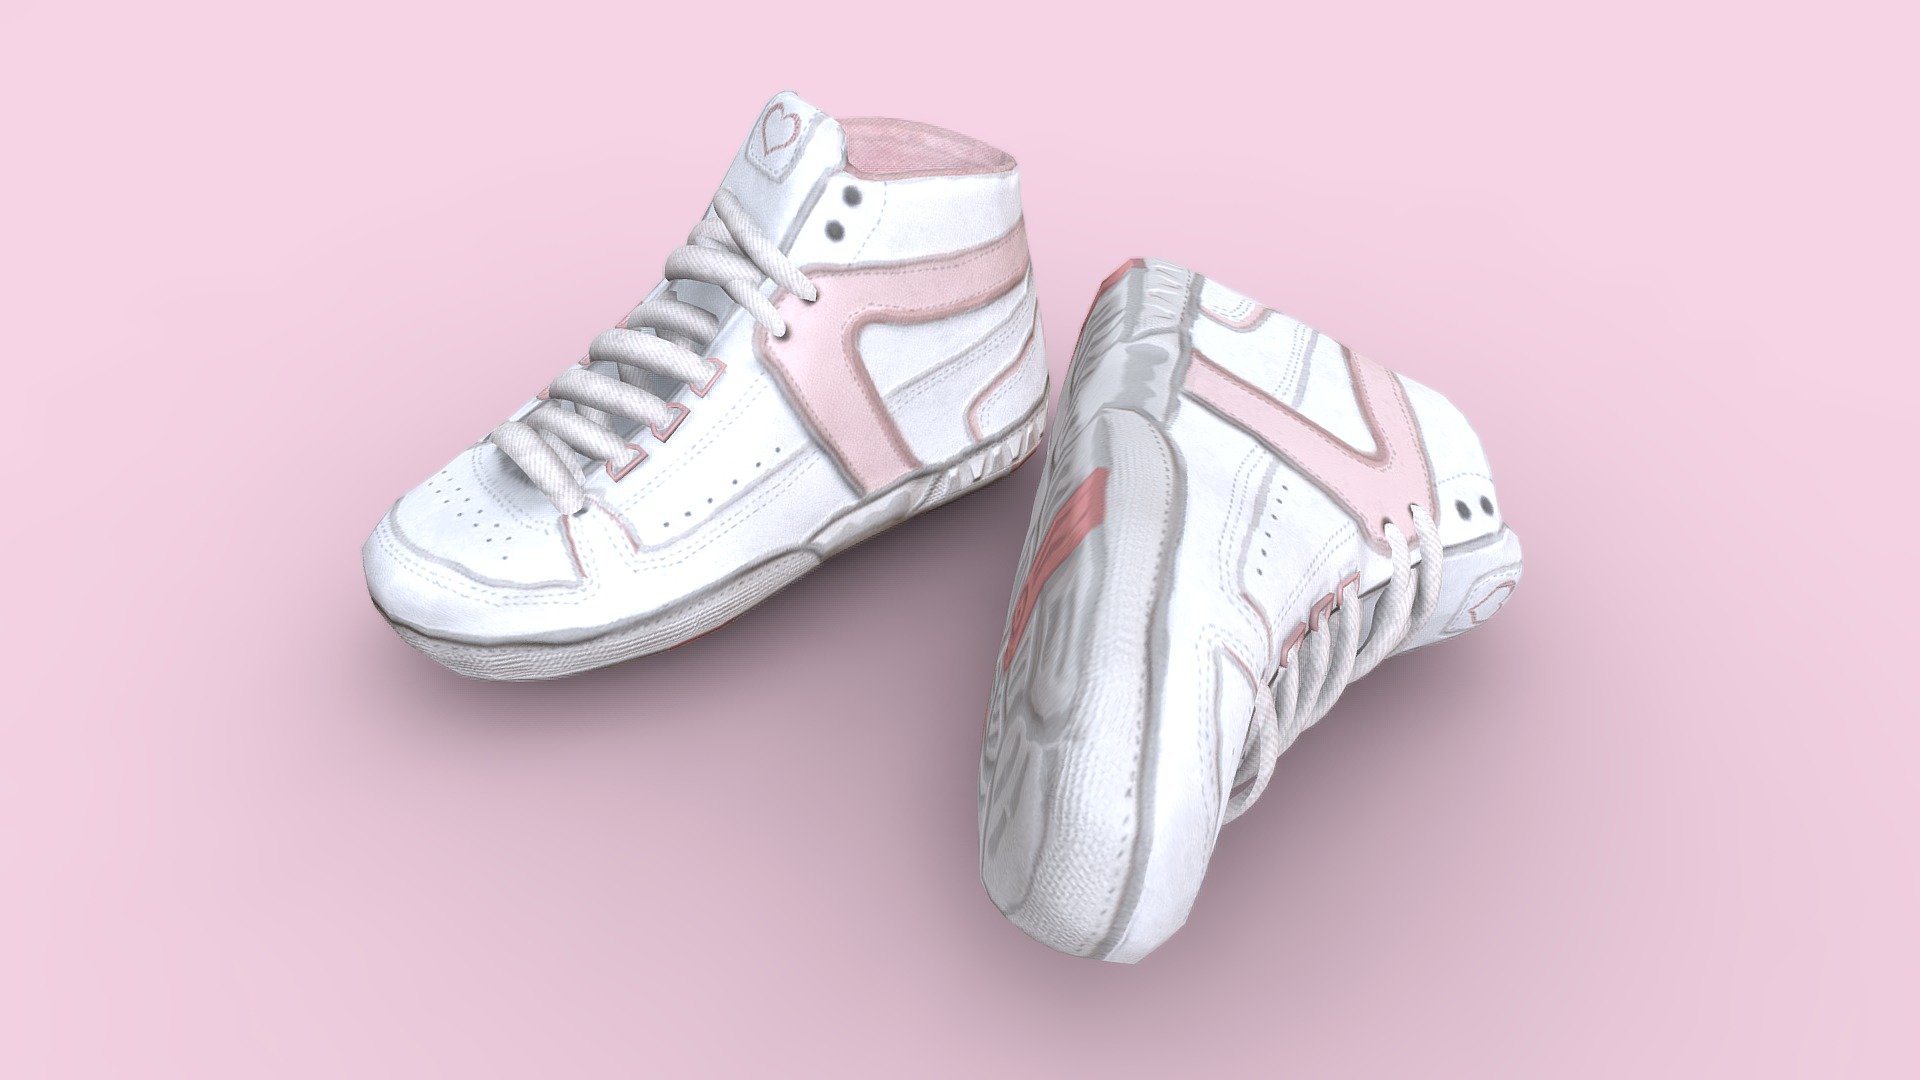 Hi-Top sneakers with a retro vibe, its design is heavily inspired by contemporary revivals of sneaker styles from the 80s-early 90s. Was originally created under a request, permission was given afterwards for me to sell. 

Details were sculpted then baked + 3d painted. For something that uses a pipeline I am just getting used to, it turned out pretty satisfactorily.

Modelled using Blender and textured with Subtance Painter and Designer.

Download file includes textures along with a .blend as well as .FBX for both left and right shoes in addition to the fbx file used in this sketchfab post.

27th September 2020 update: Additional even lower poly set provided on the source file + displayed on the preview. These further simplified meshes should be more appropriate for character use! - Hi-Top Sneakers - Buy Royalty Free 3D model by billionlioe 3d model